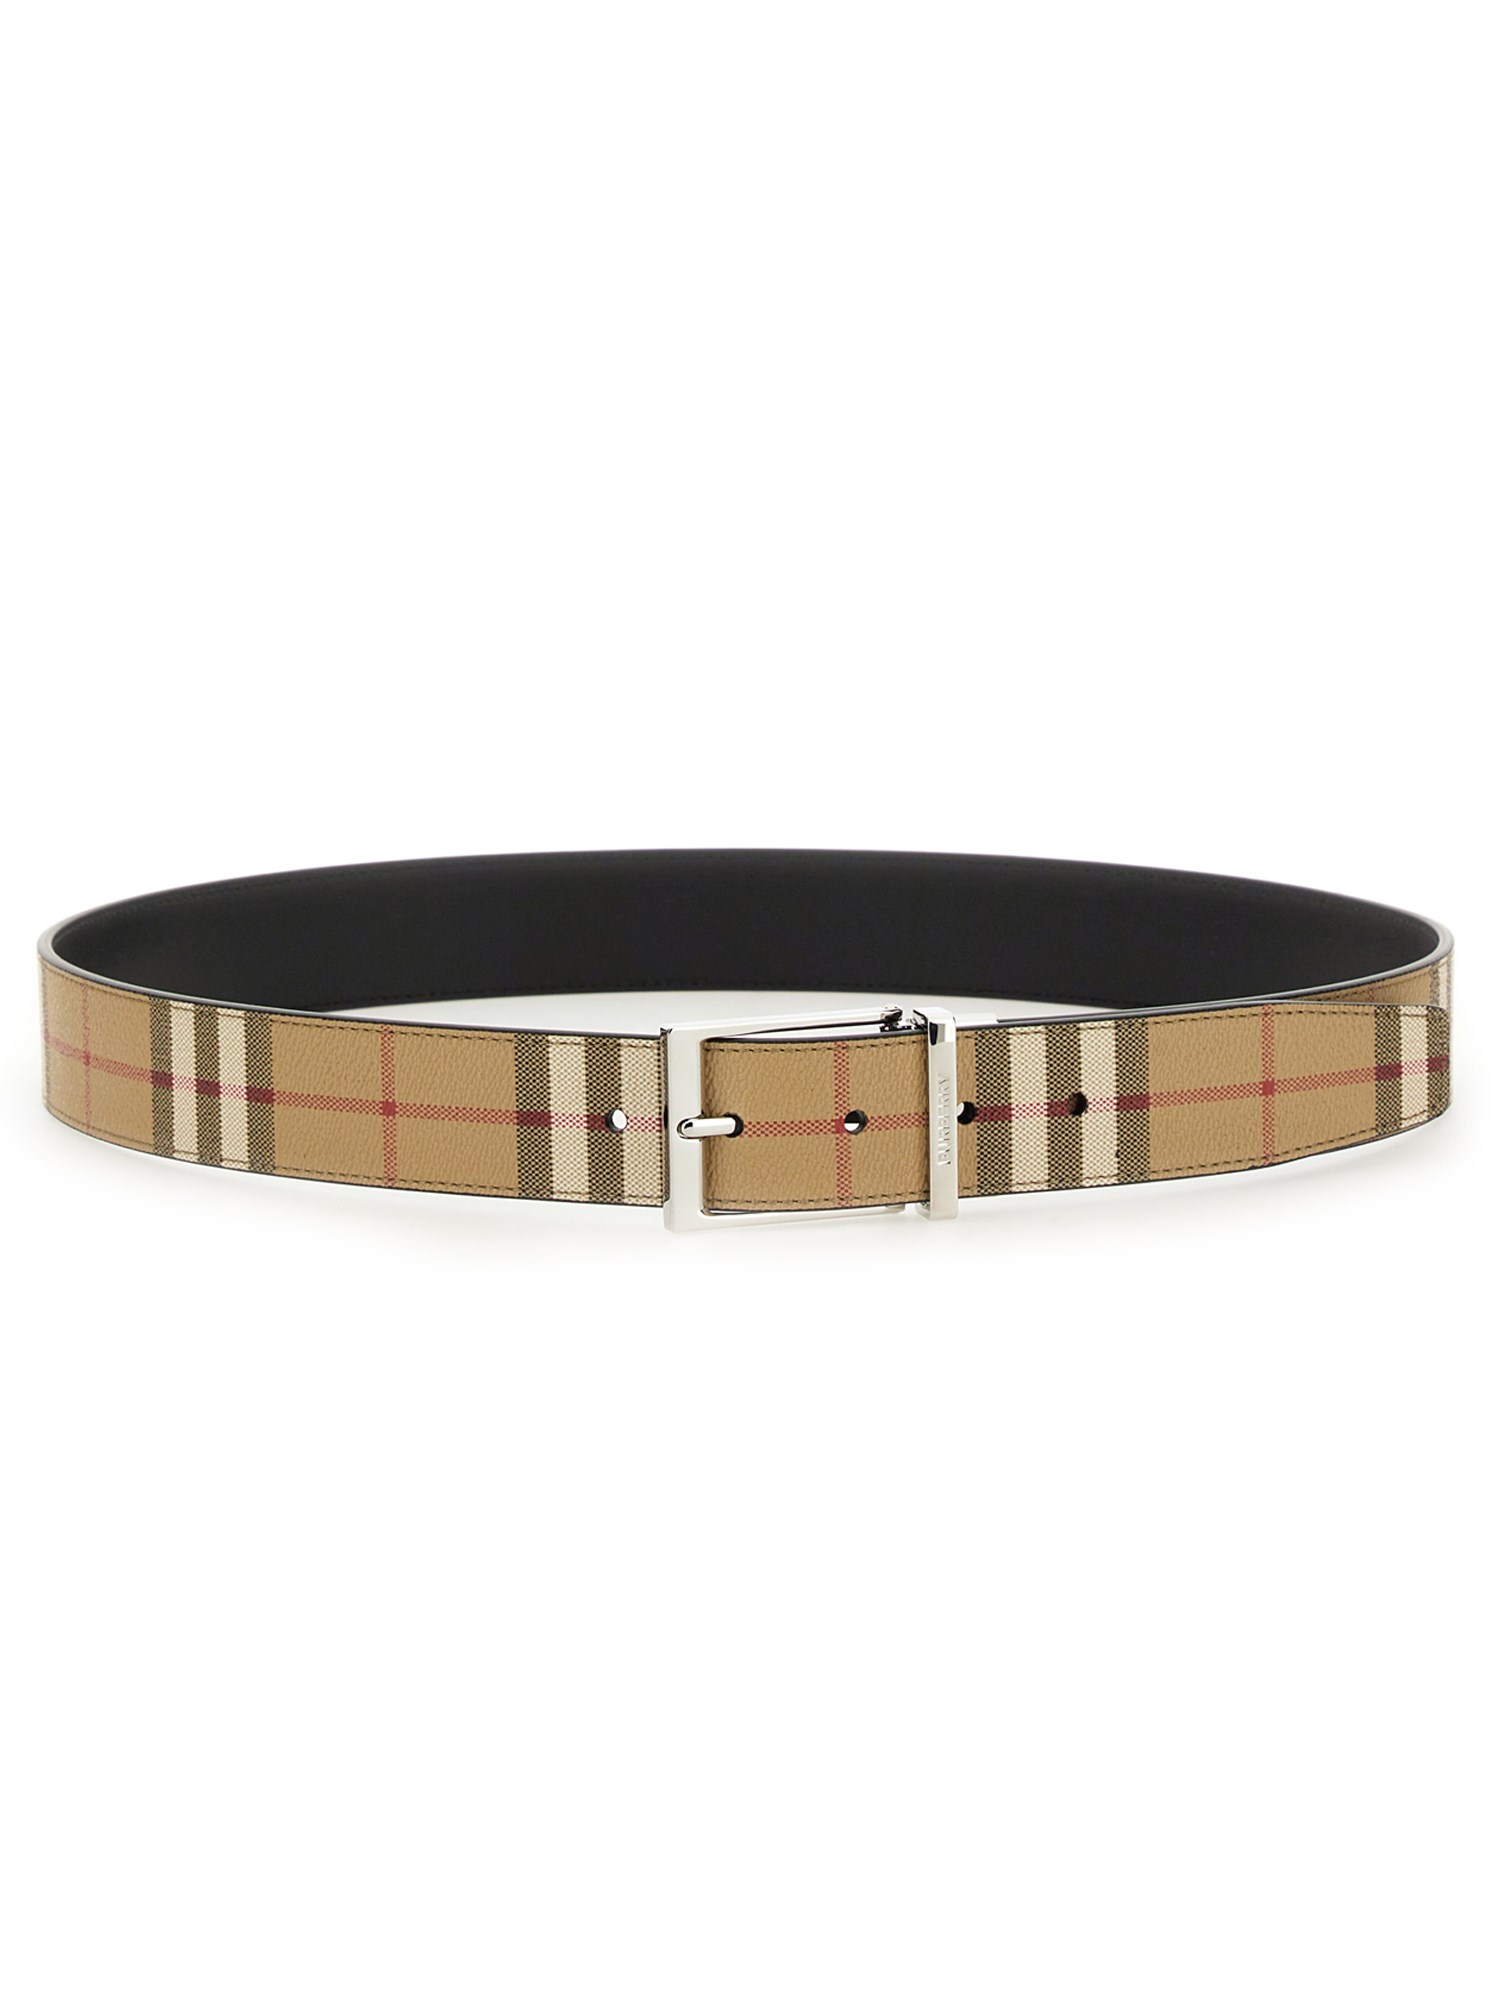 Burberry Reversible Check Belt In Brown